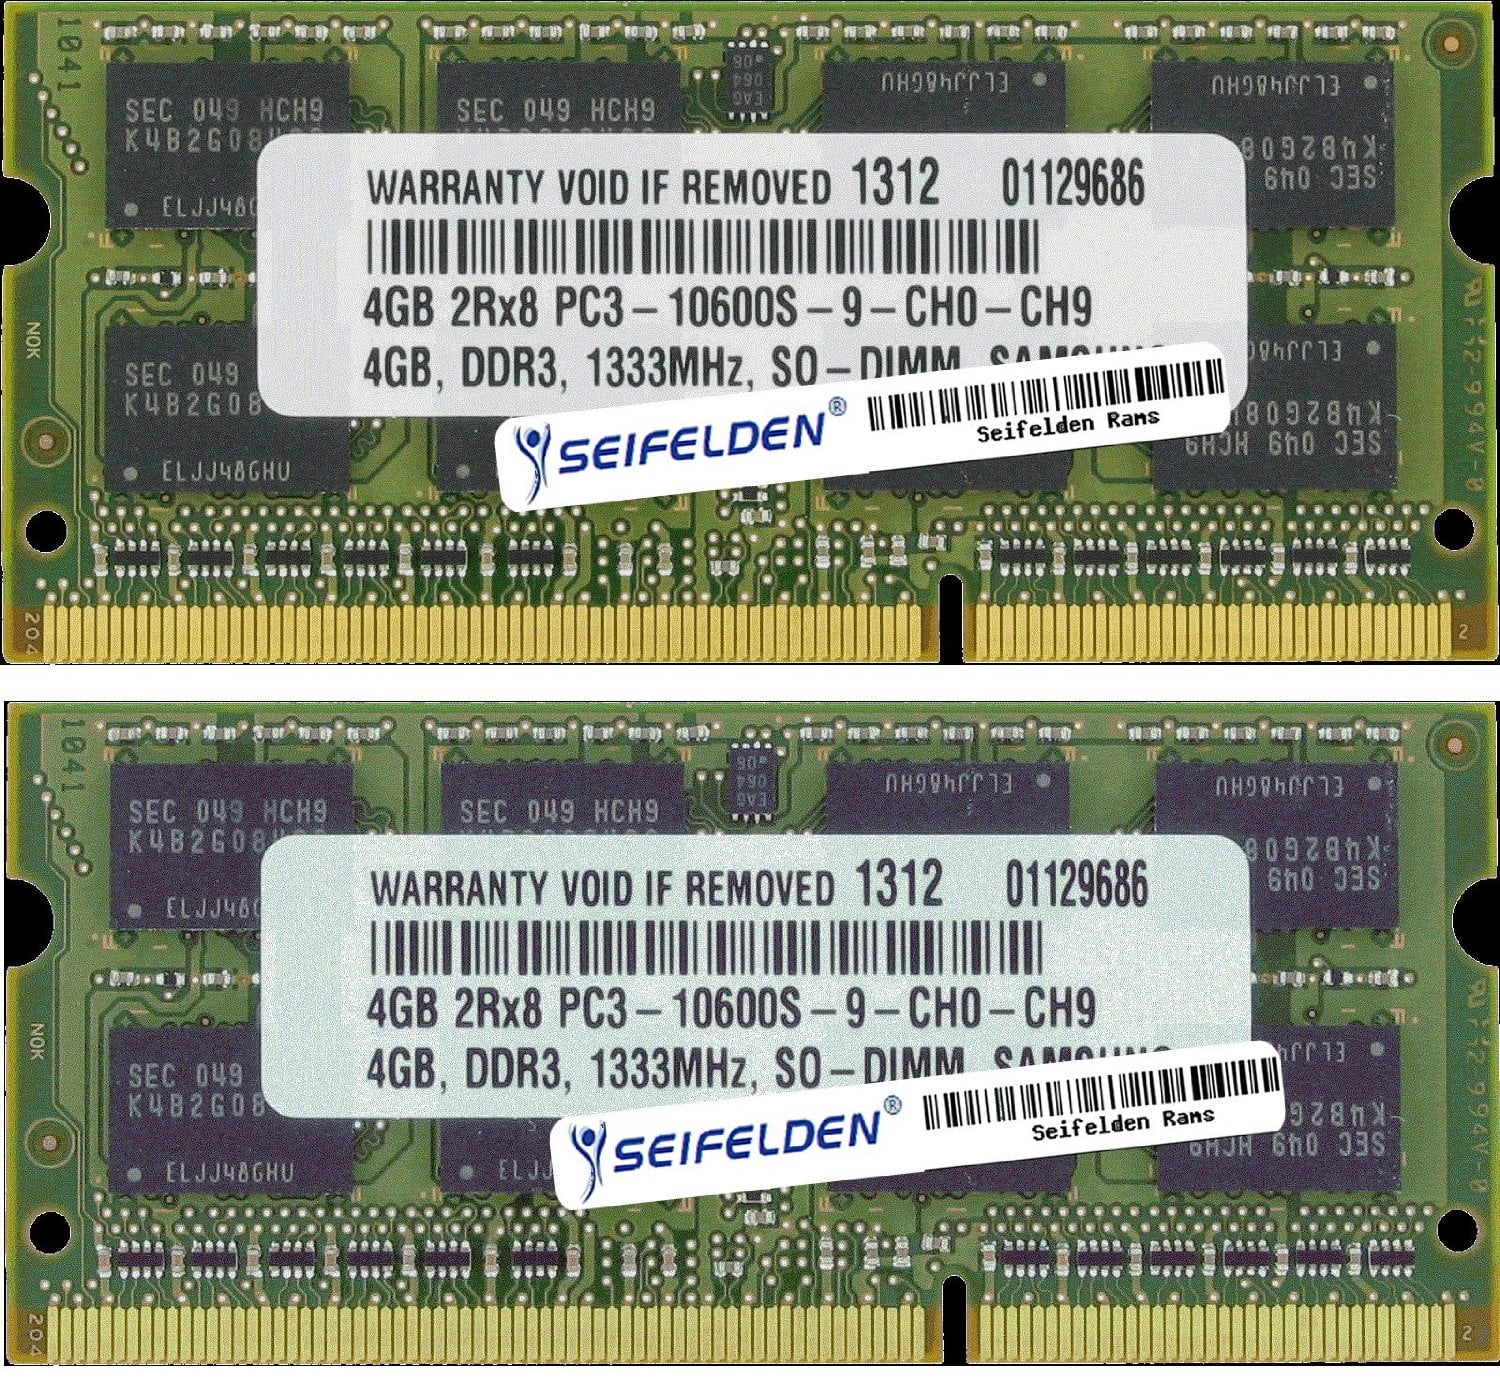 4GB Team High Performance Memory RAM Upgrade For HP 2GBx2 The Memory Kit comes with Life Time Warranty. Compaq Pavilion a6367.fr a6368.fr a6369.fr a6370.nl Desktop